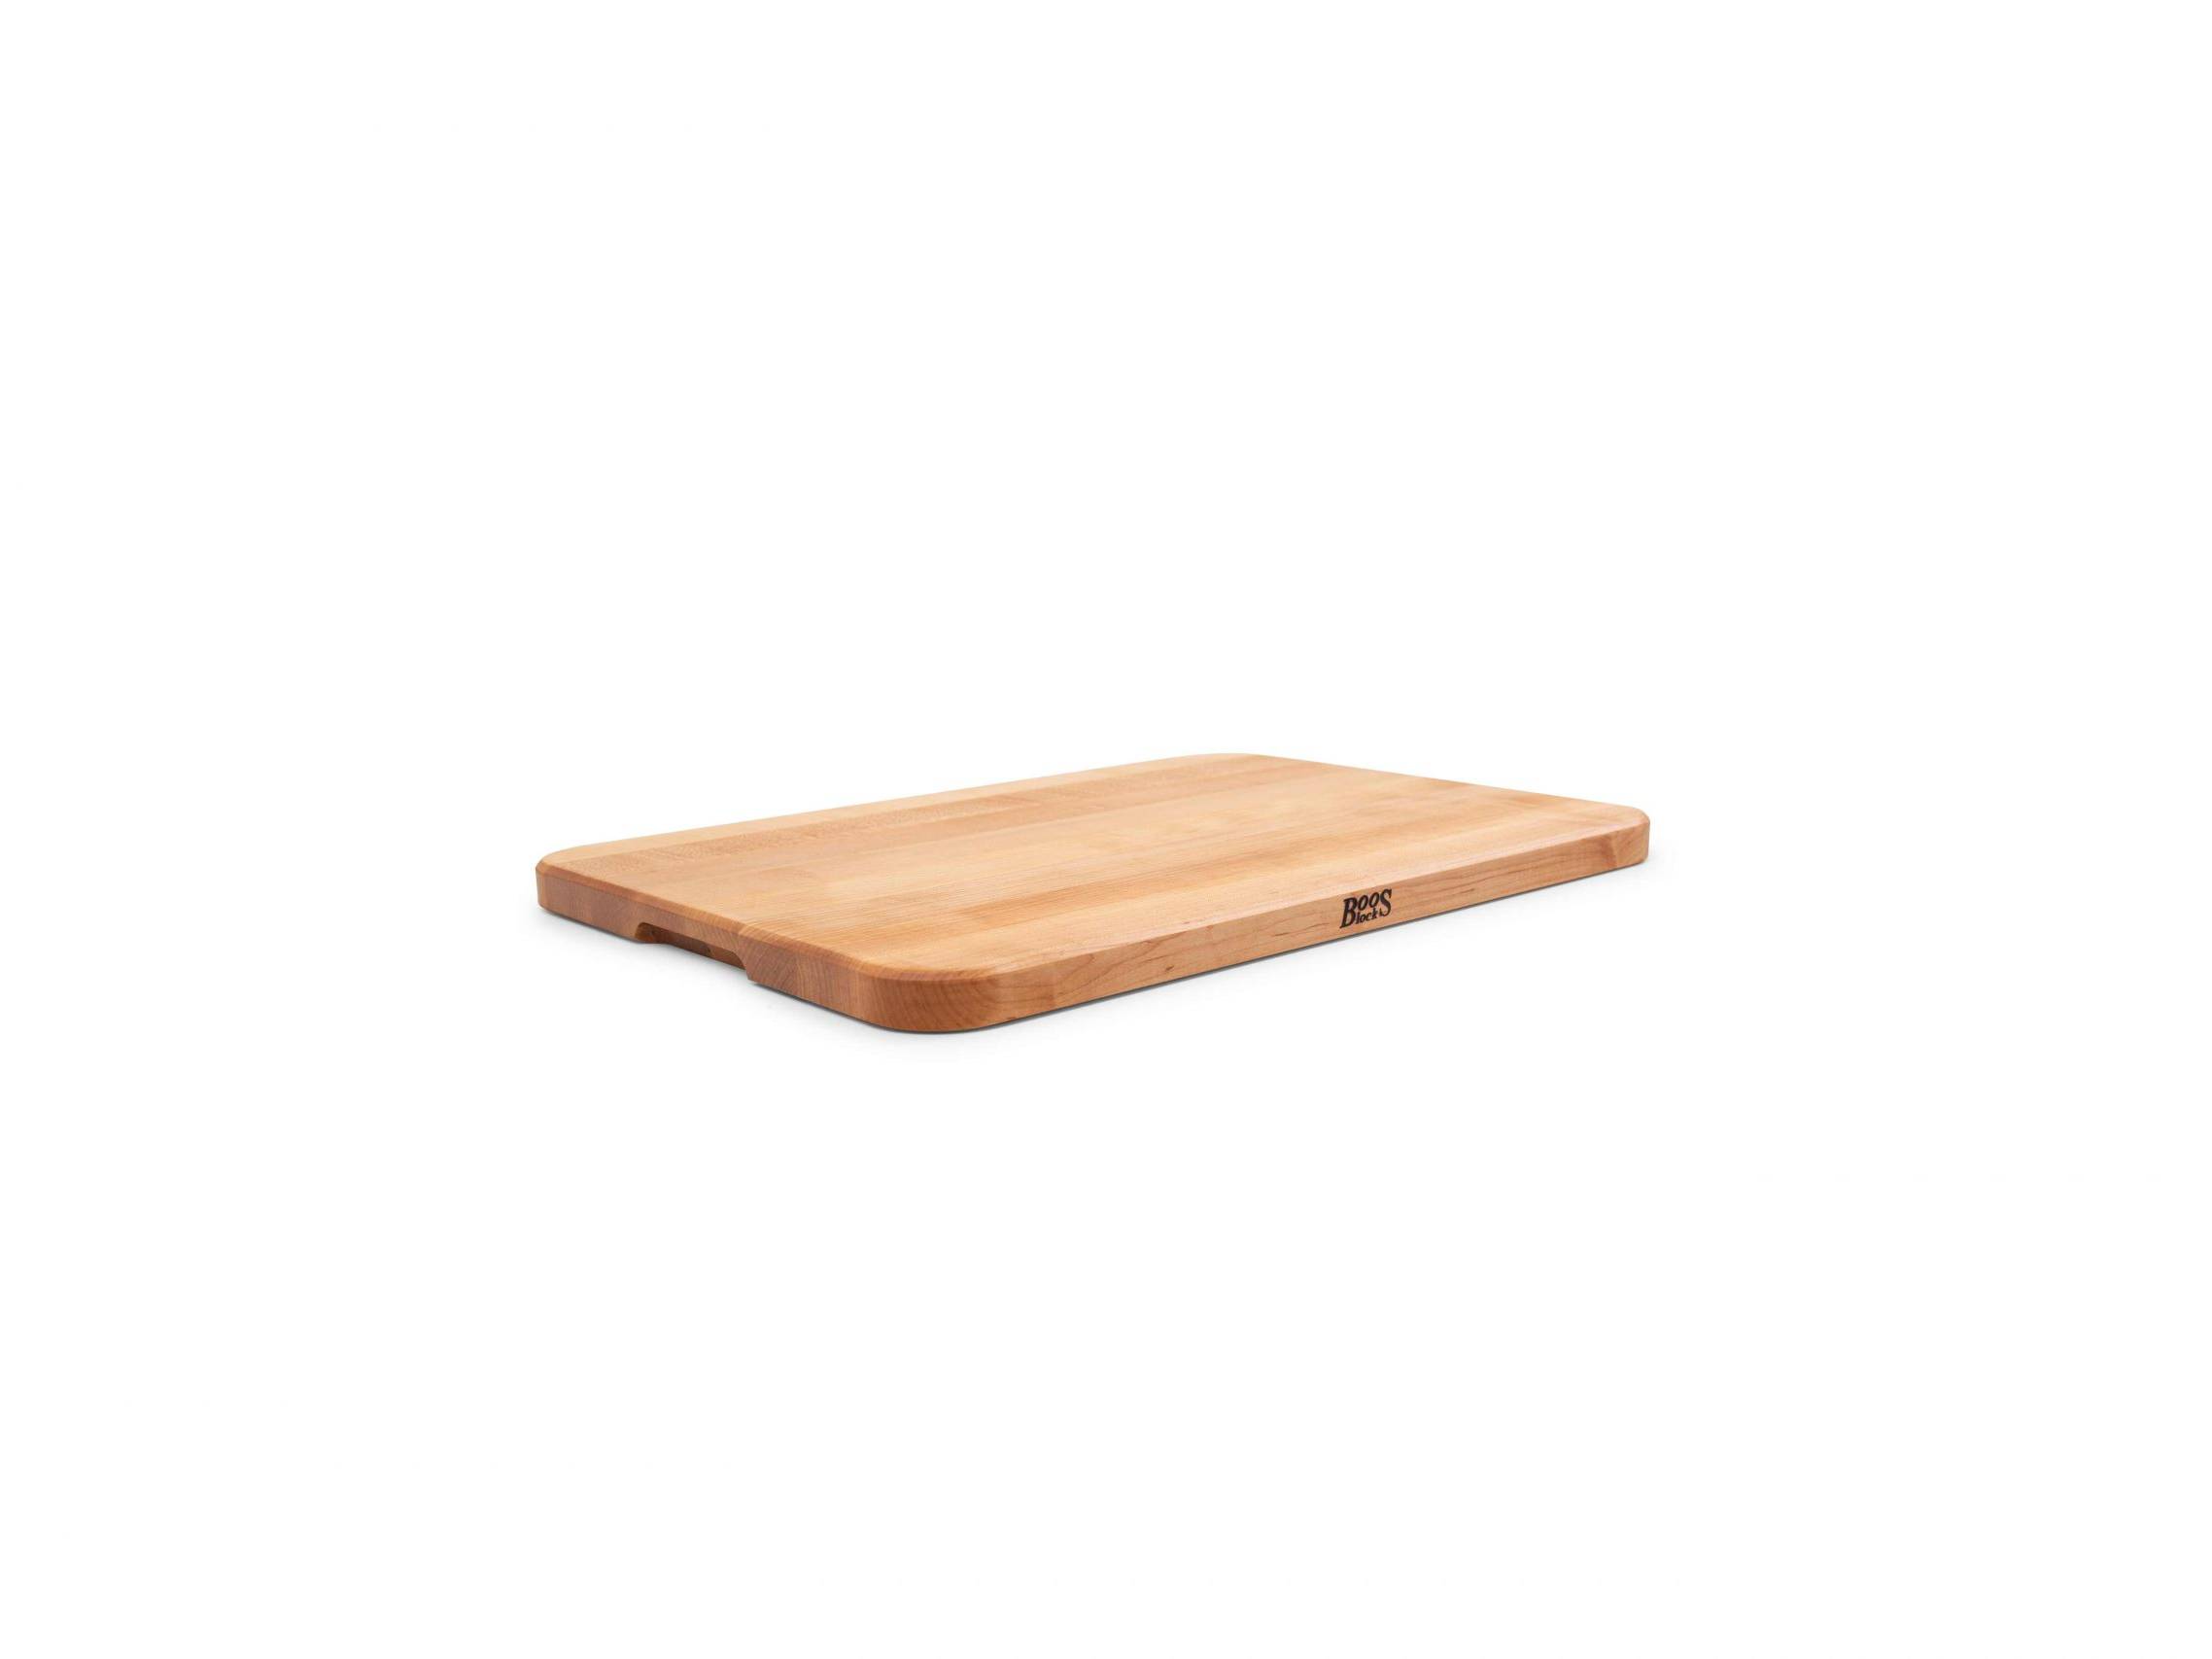 Chop-N-Serve Hard Maple Cutting Board with recessed grip; can be used on both sides 19